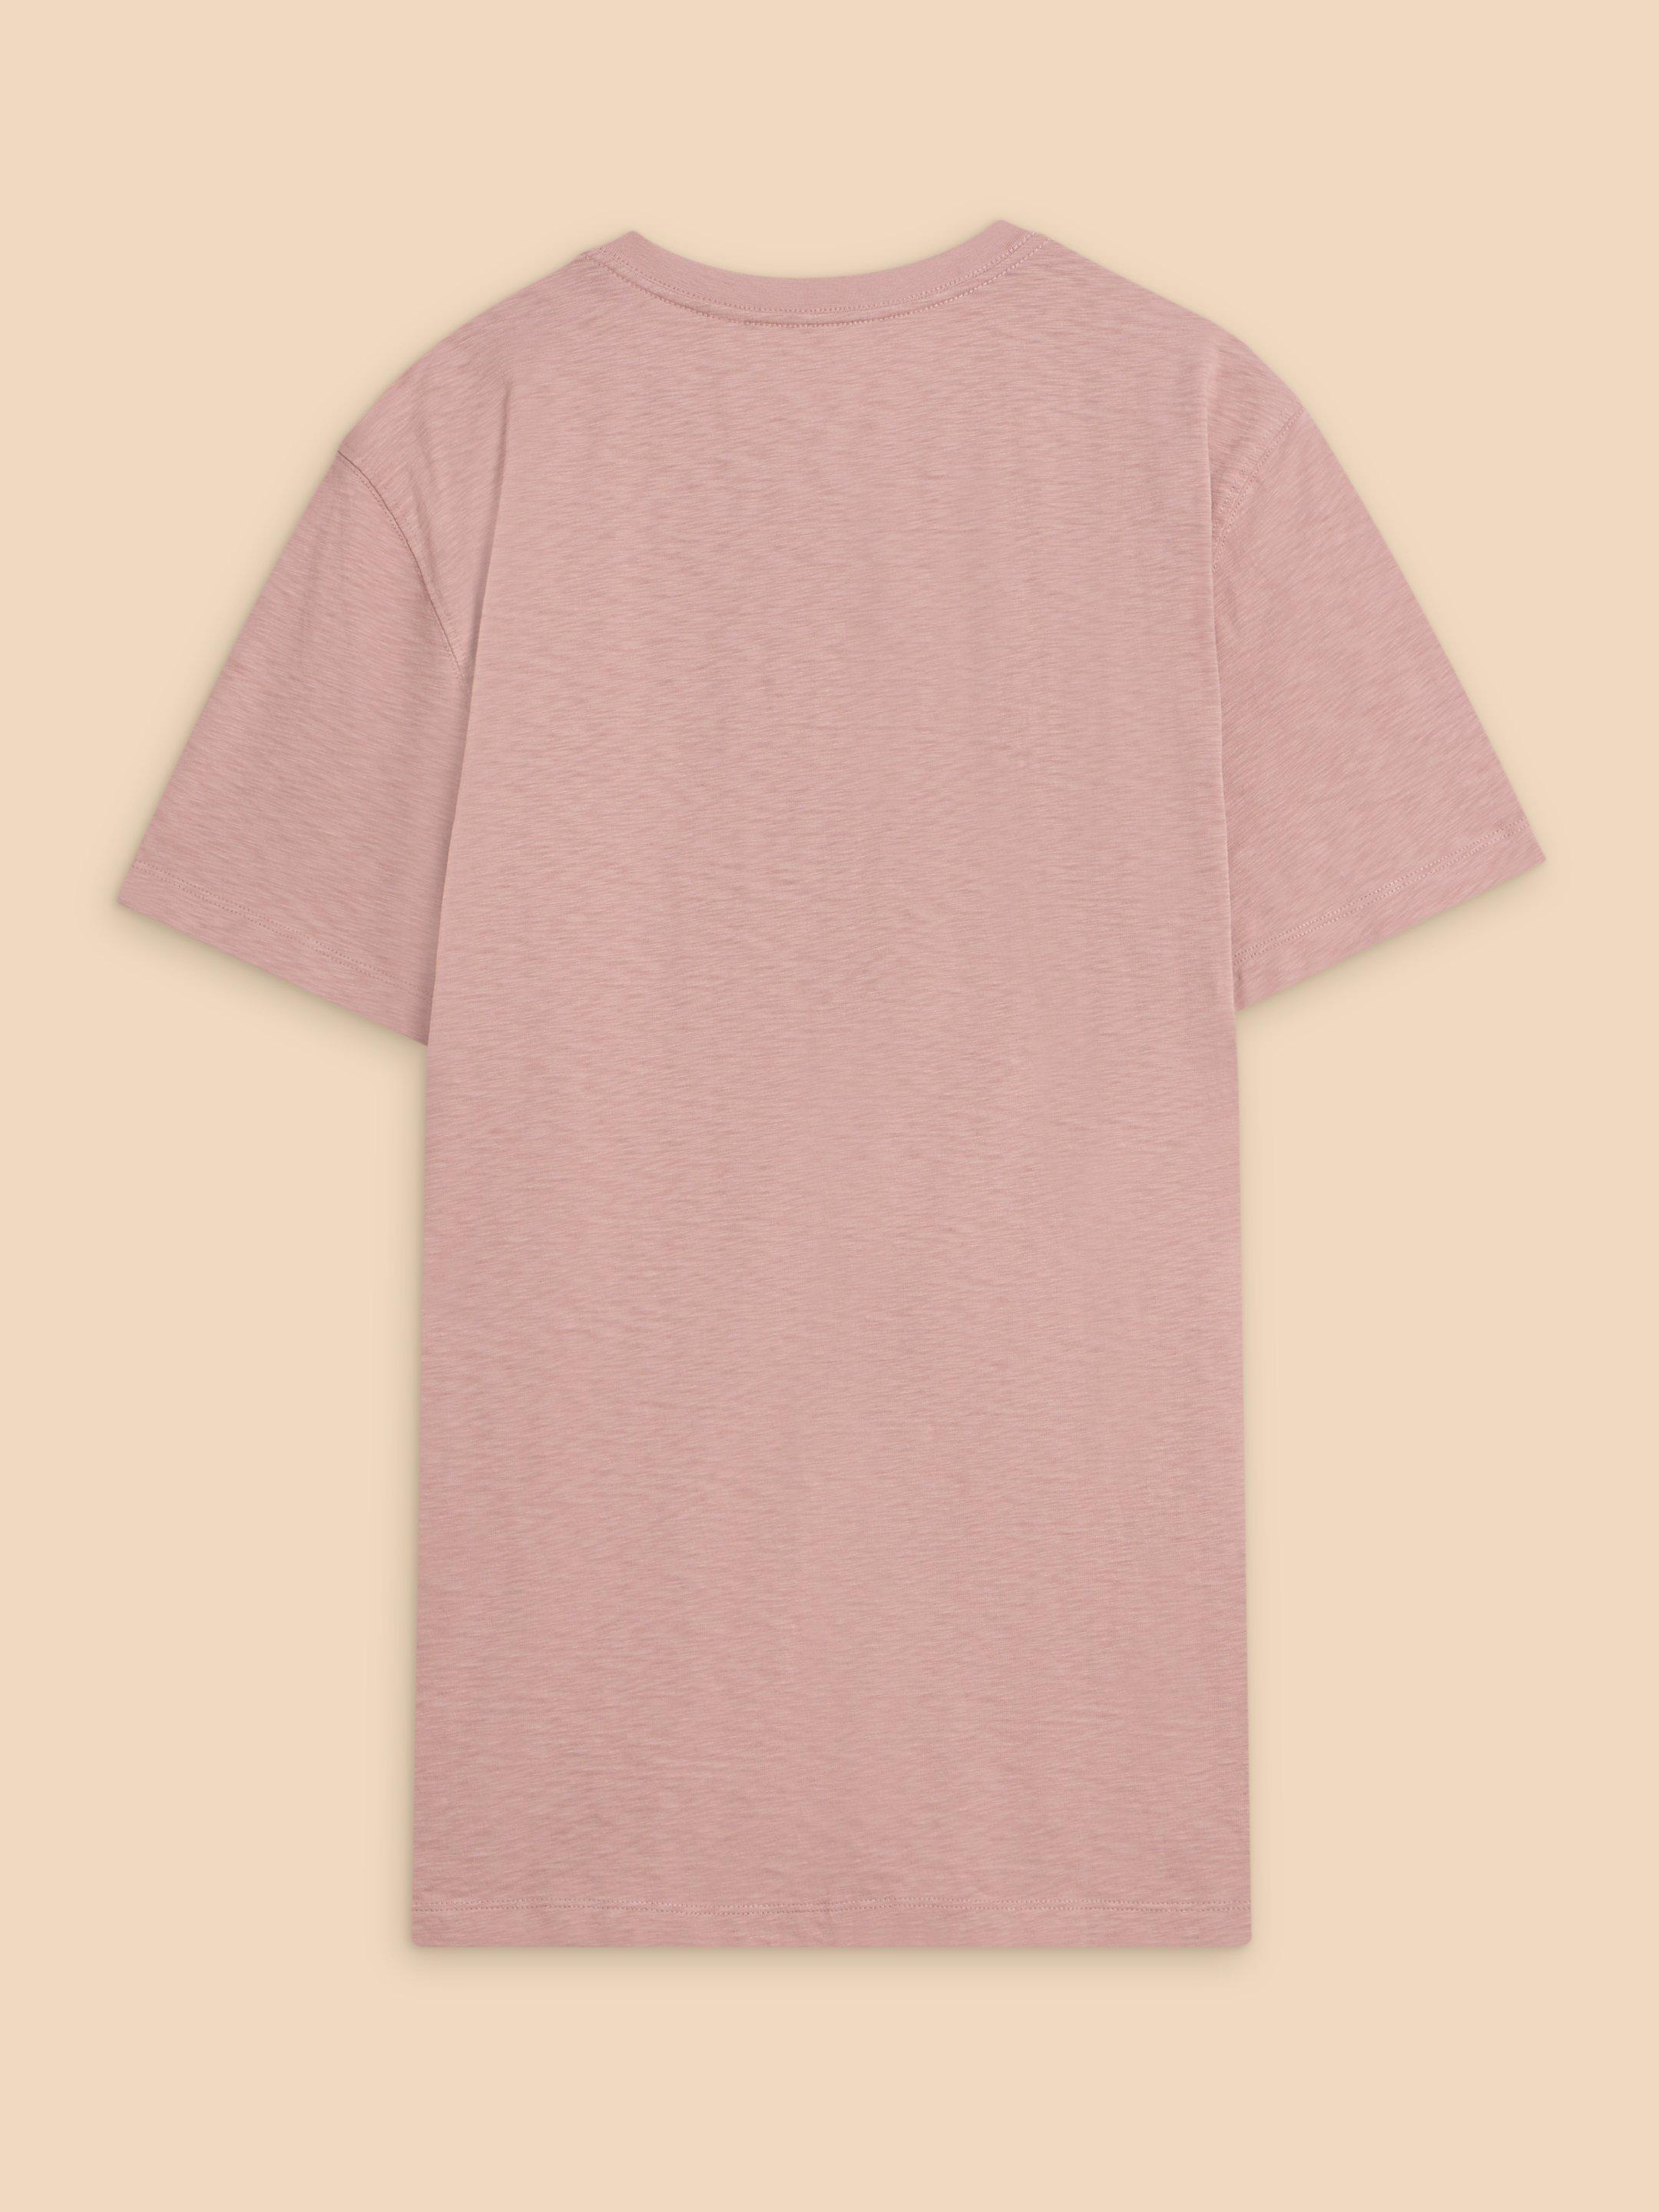 Escape Graphic Short Sleeve Tee in PINK PR - FLAT BACK